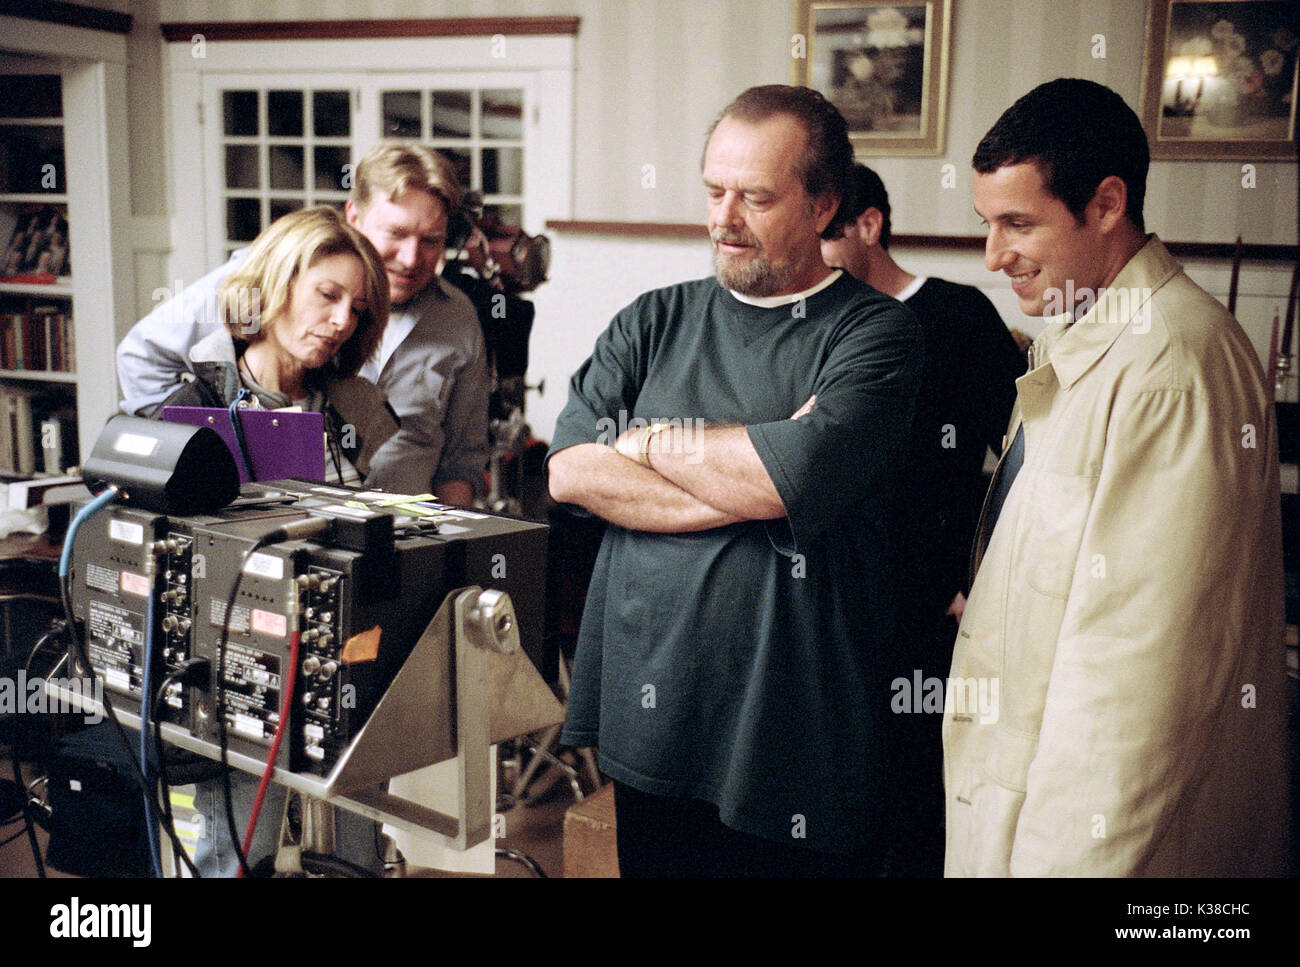 ANGER MANAGEMENT JACK NICHOLSON WATCHING PLAYBACK A PARAMOUNT PICTURE/REVOLUTION STUDIOS PRODUCTION     Date: 2003 Stock Photo